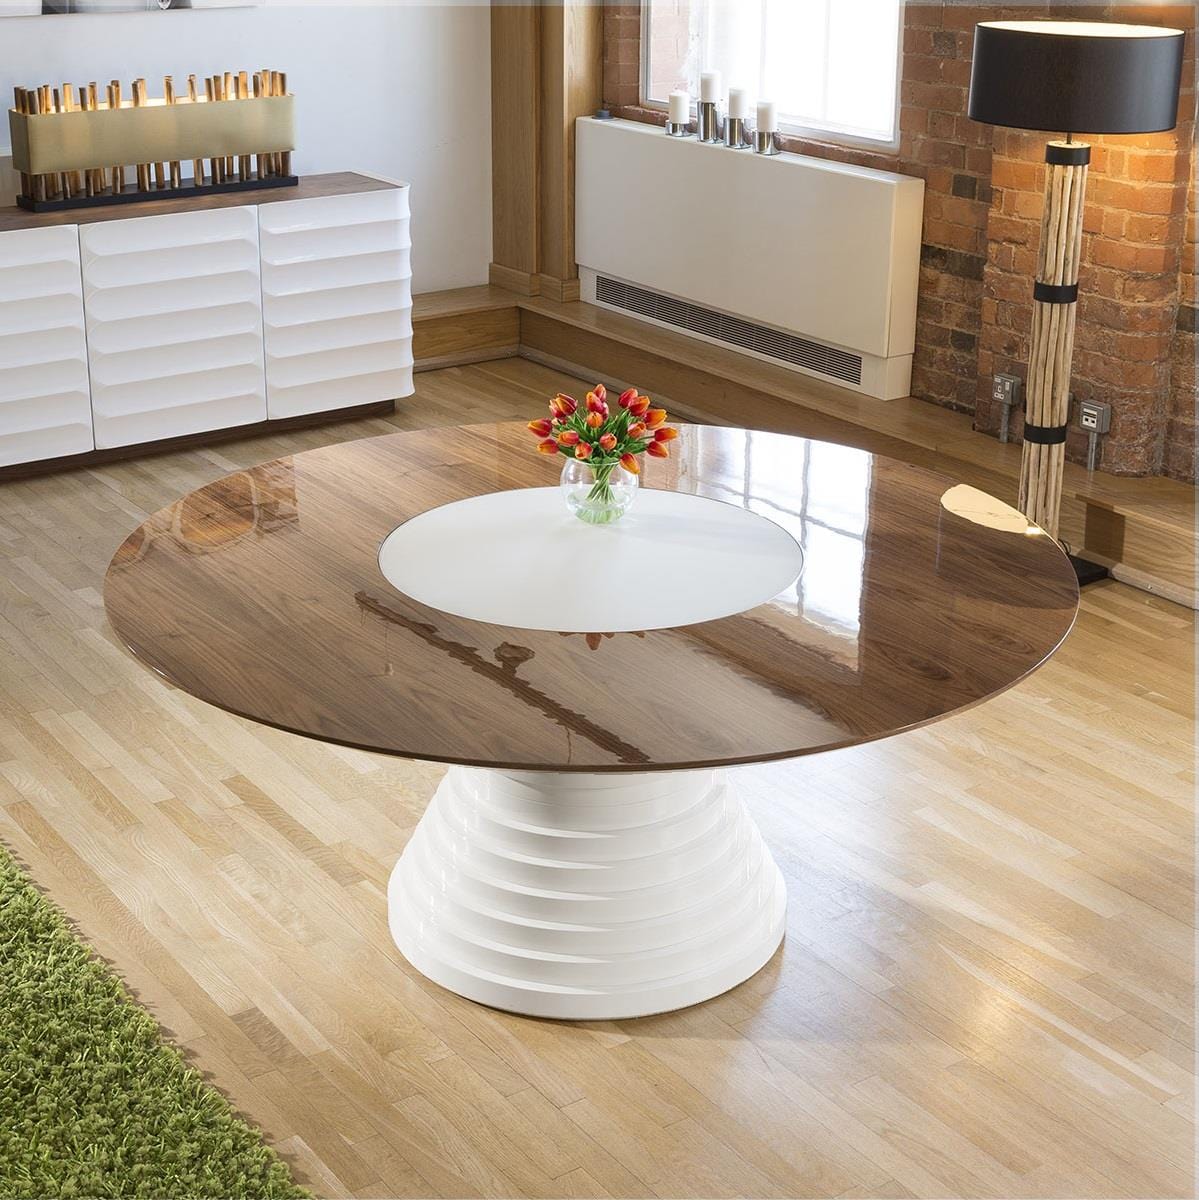 Quatropi Large Round Lacquered Walnut White Gloss Dining Table Glass Insert 1.8